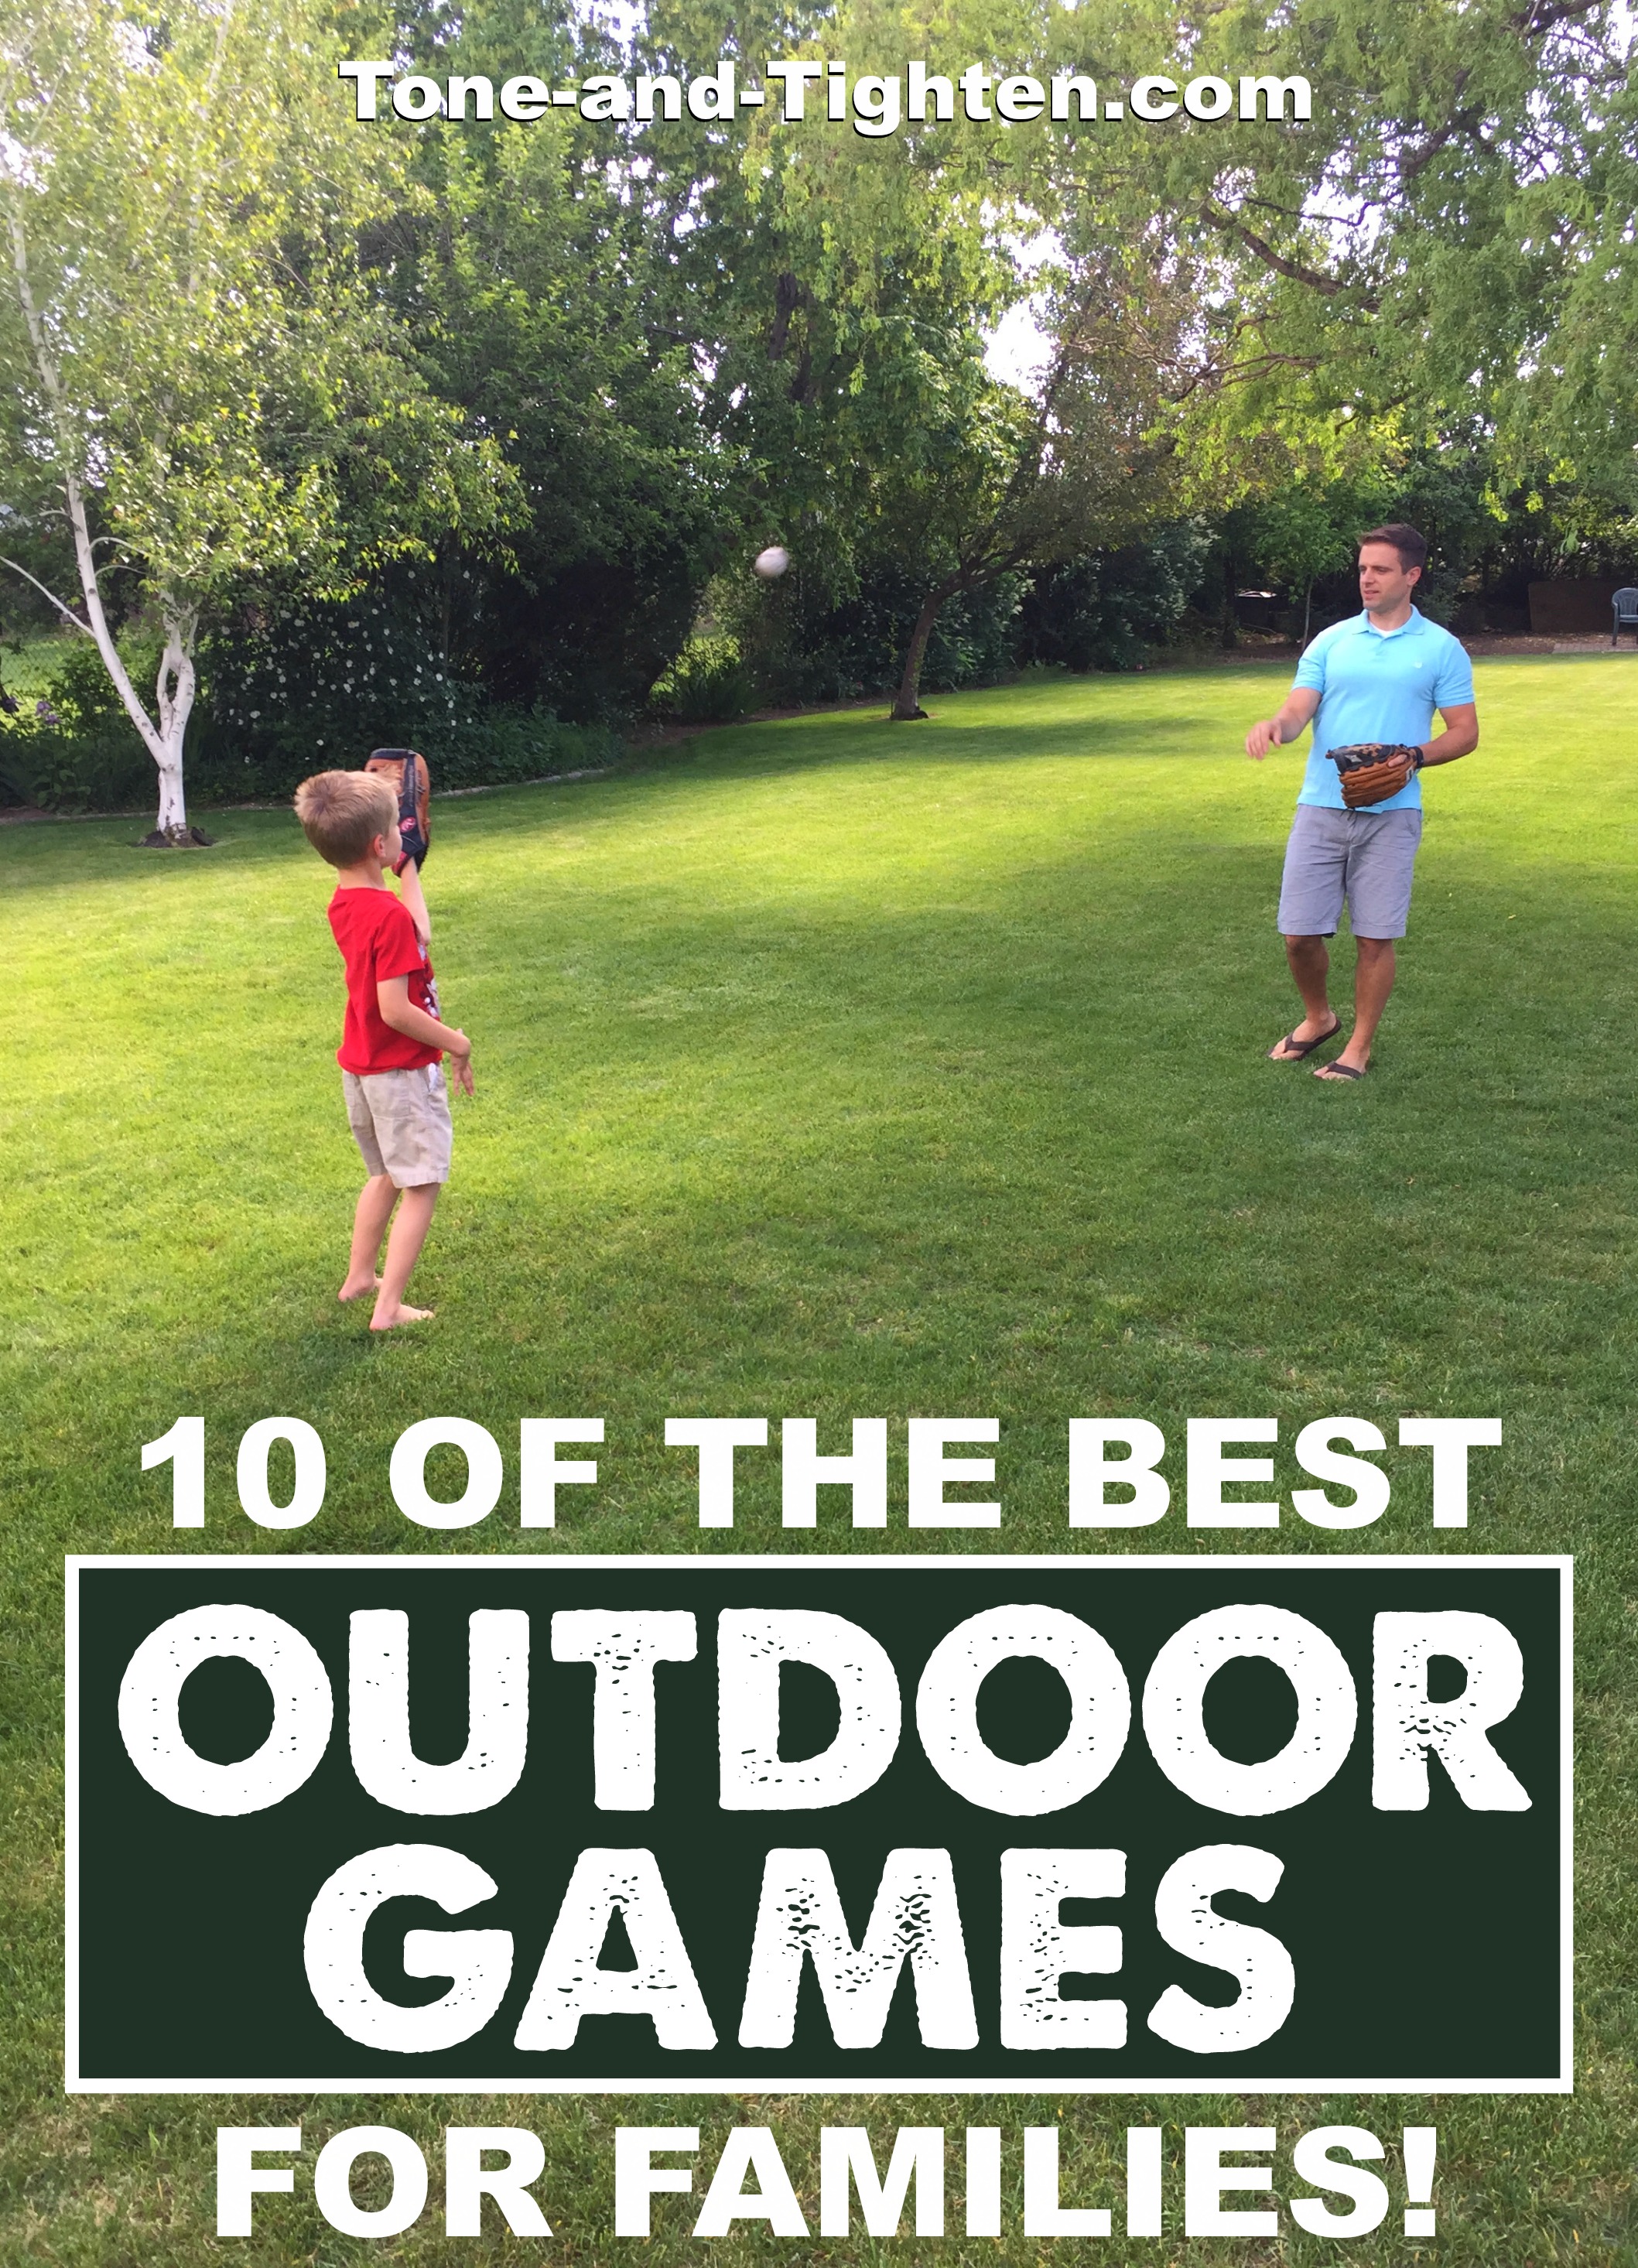 Top 10 Outdoor Games To Play With Your Family